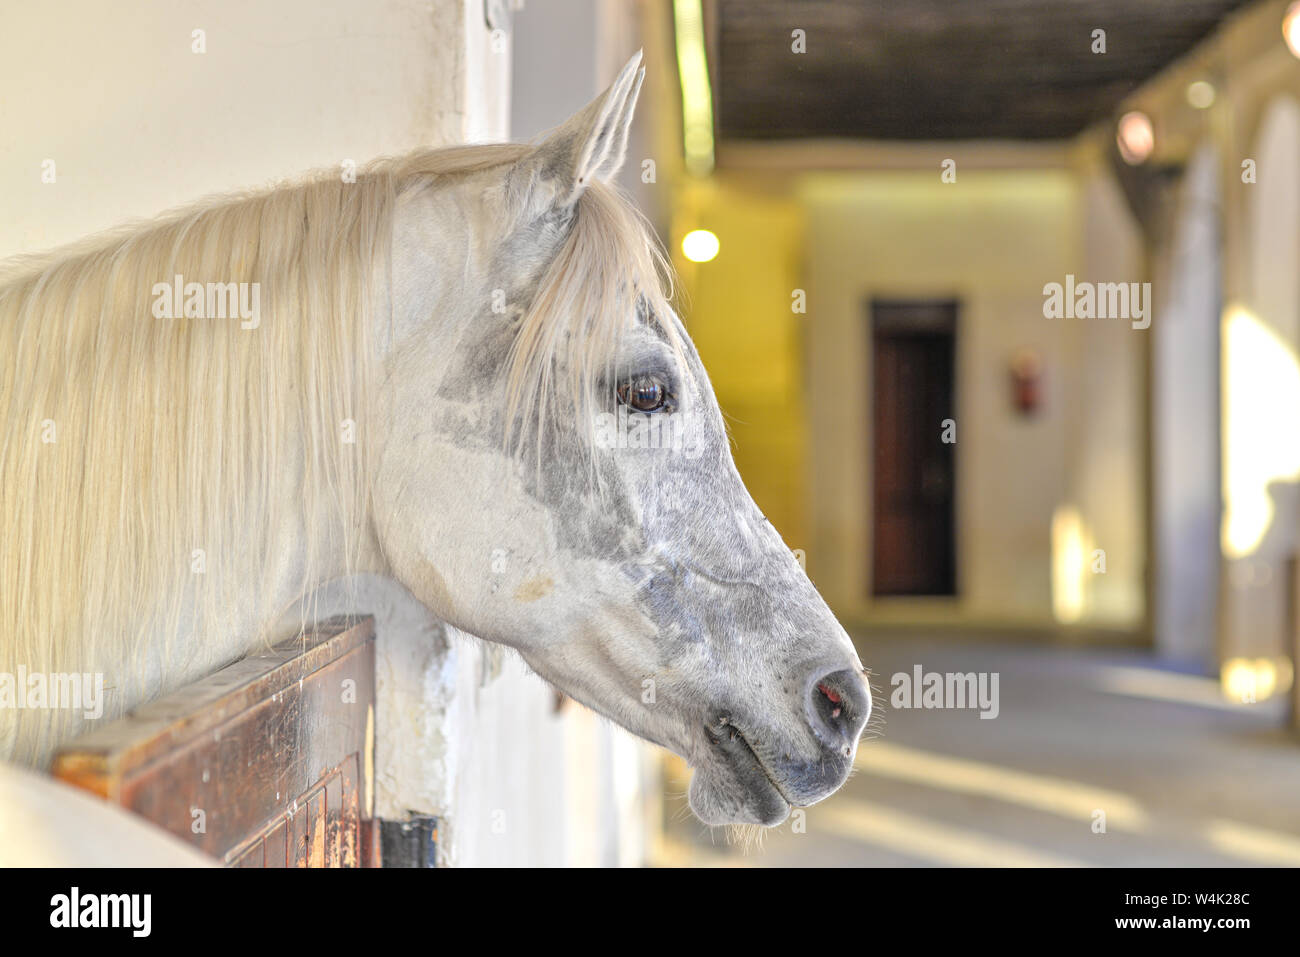 DOHA, QATAR - JANUARY 23, 2016:  Head of a white and grey horse taken at the stable of the Doha's old souq at the end of a winter afternoon Stock Photo